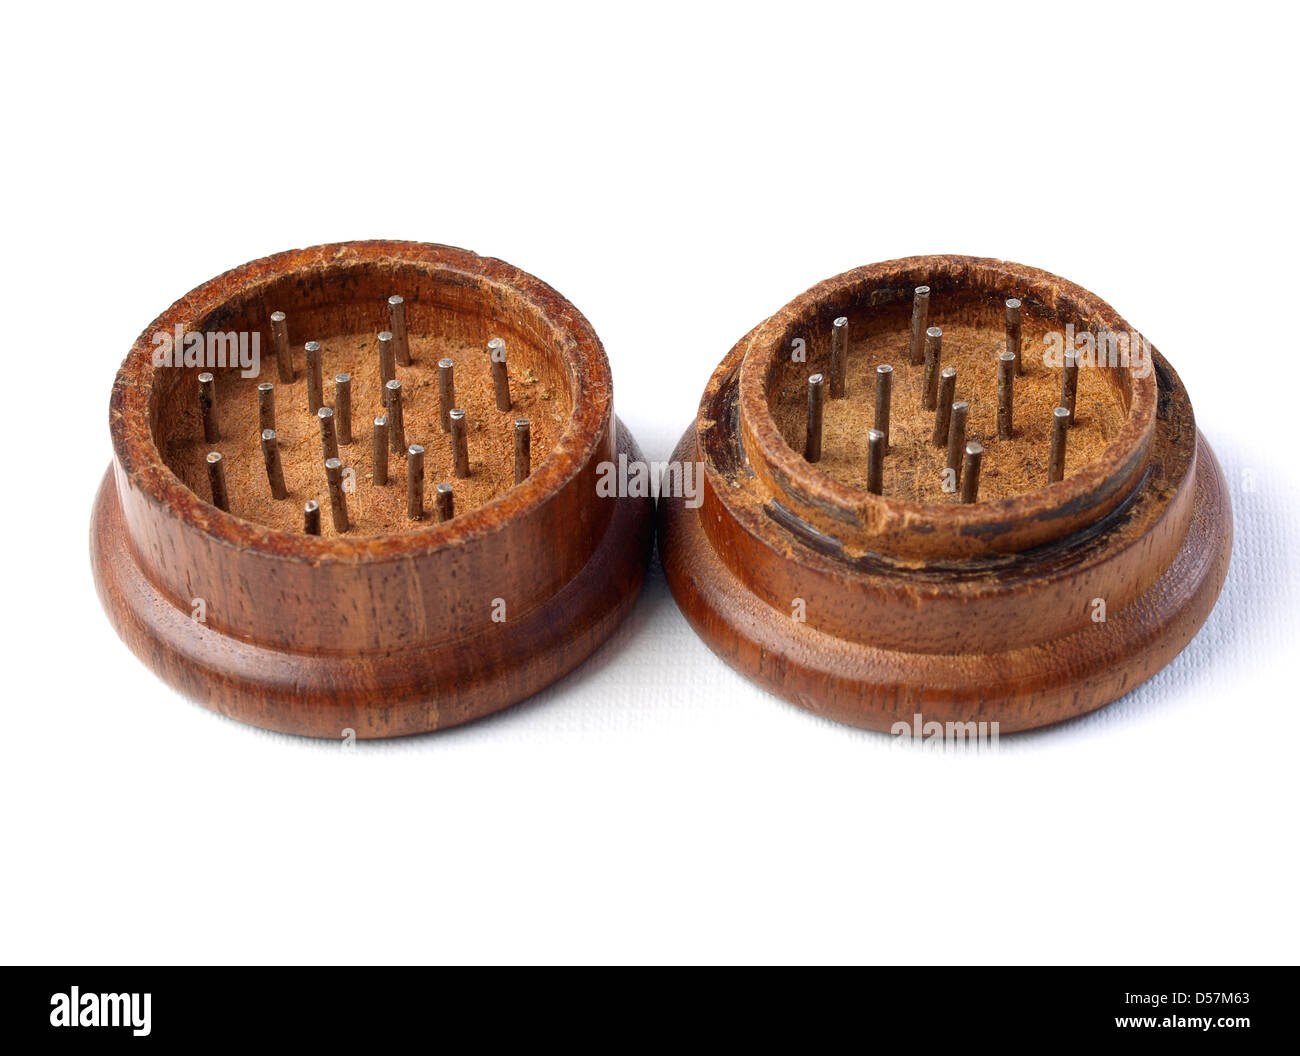 Grinder marihuana detail. The photo shows a macro photo oof a wooden grinder  Stock Photo - Alamy